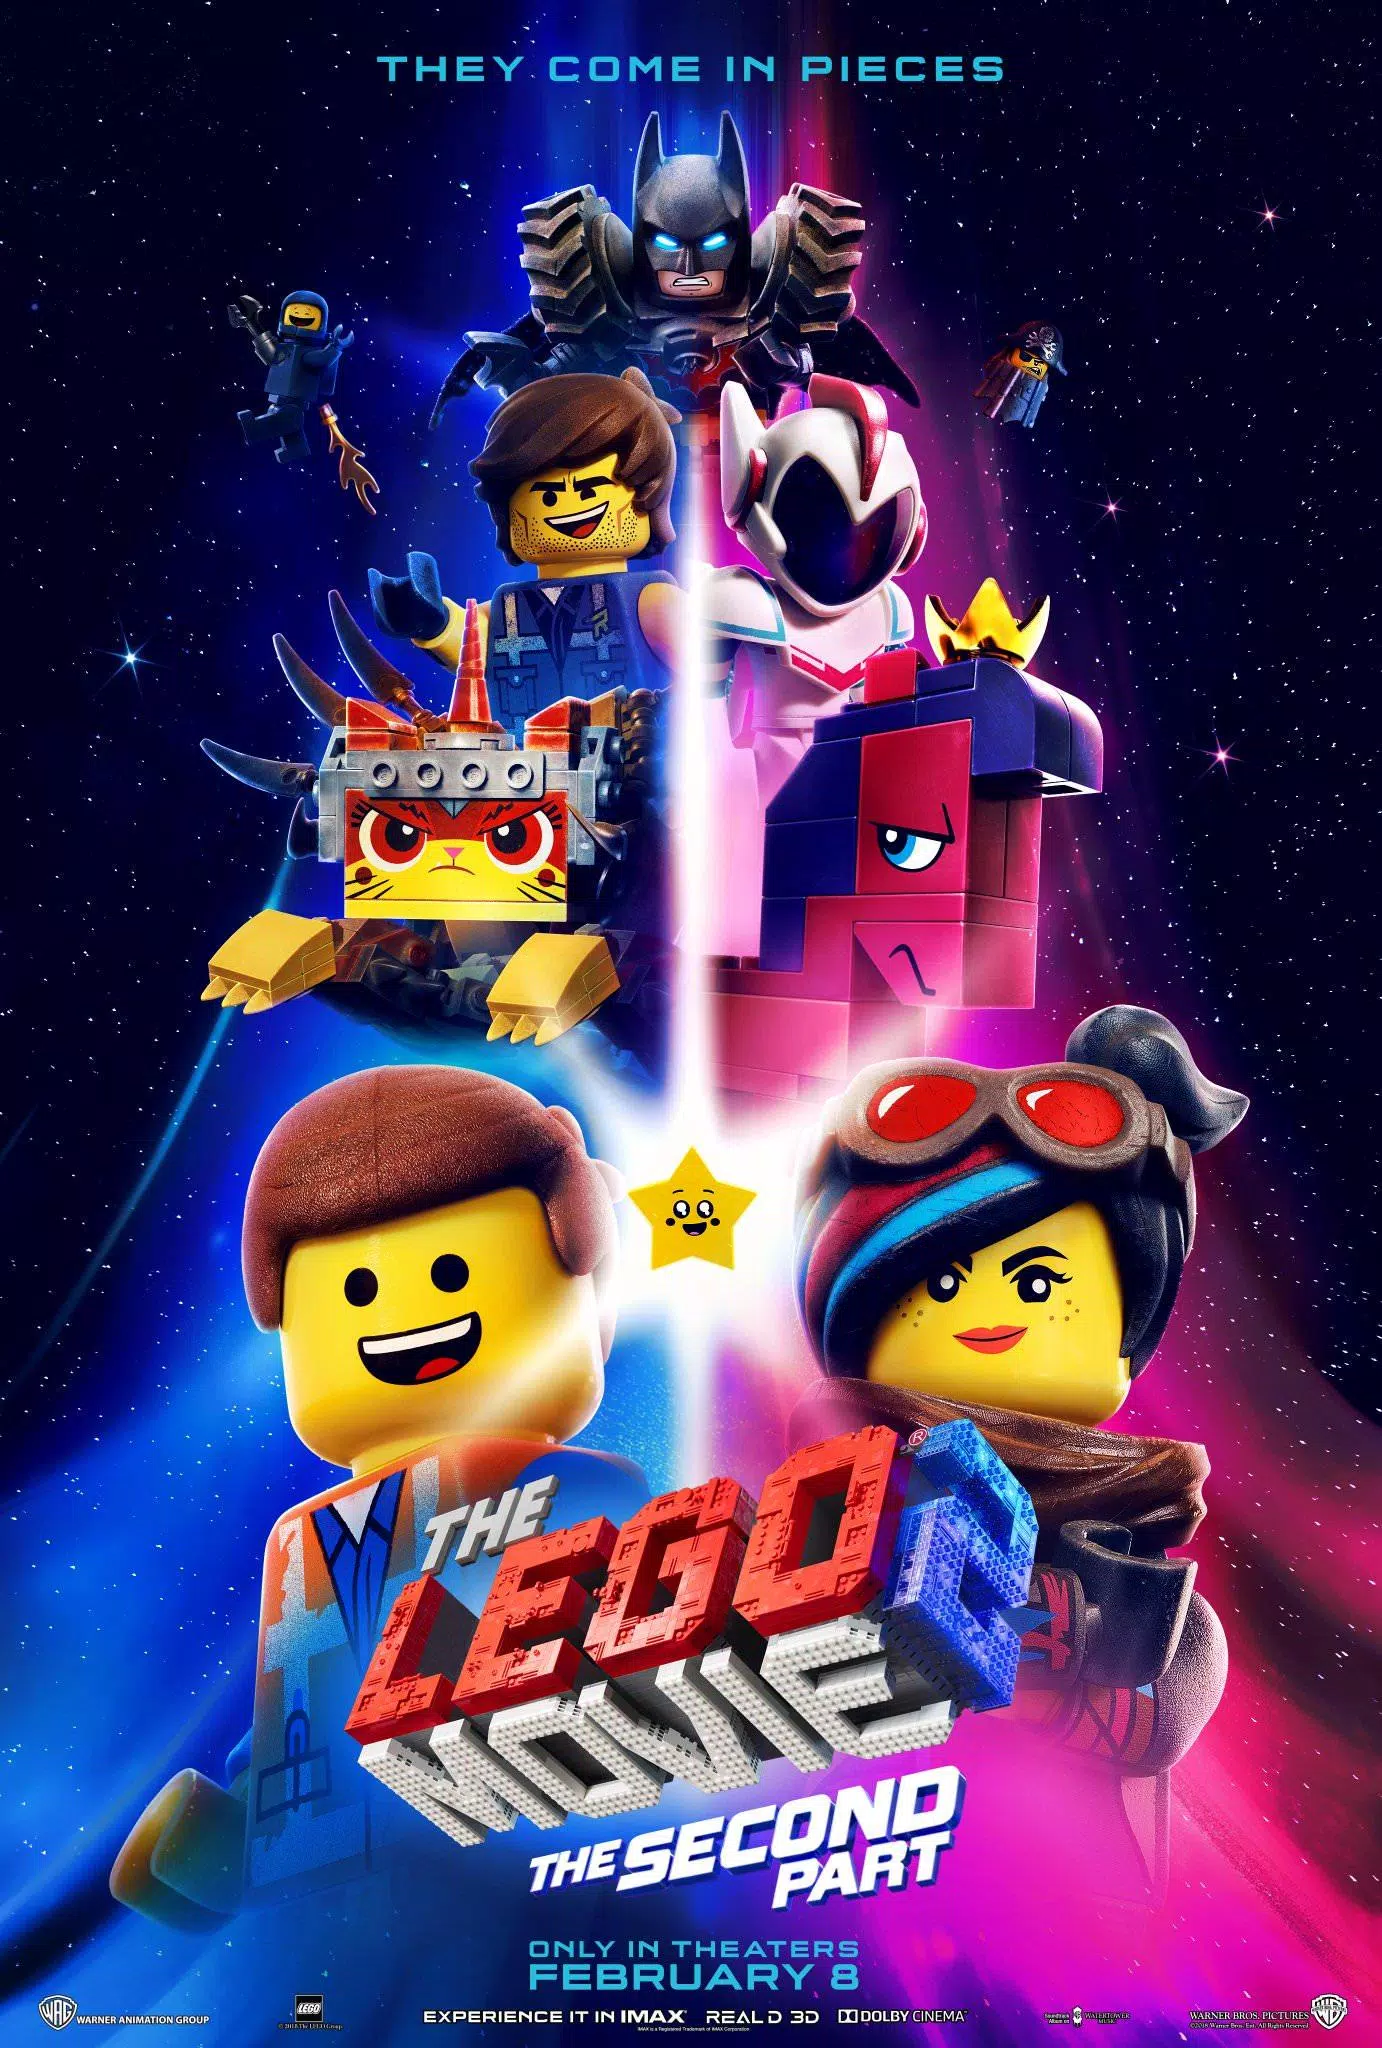 Lego Movie Wallpaper Ultimate Collection APK for Android Download